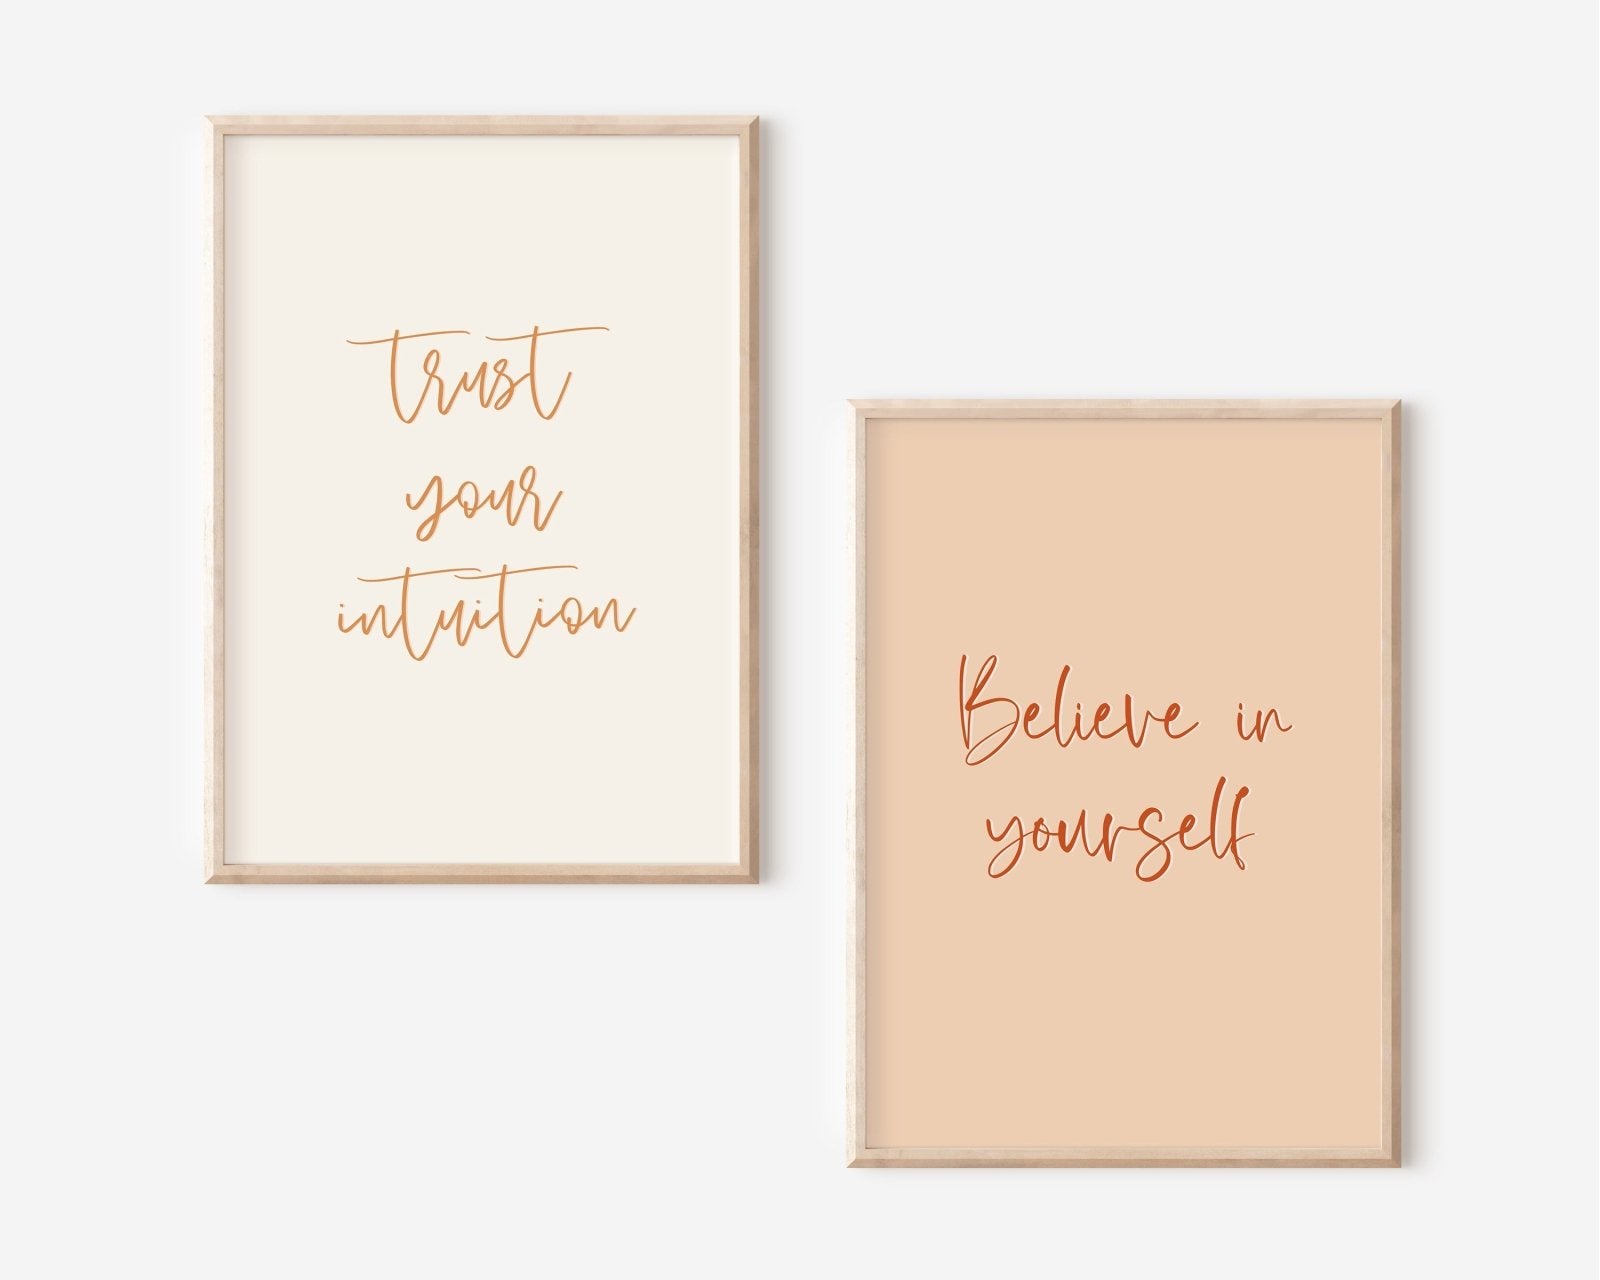 Poster Believe in yourself, Poster Selbstbewusstsein, Poster Sprüche, Poster Achtsamkeit, Yoga Poster, Affirmationsposter, Din A4 - HappyLuz Shop